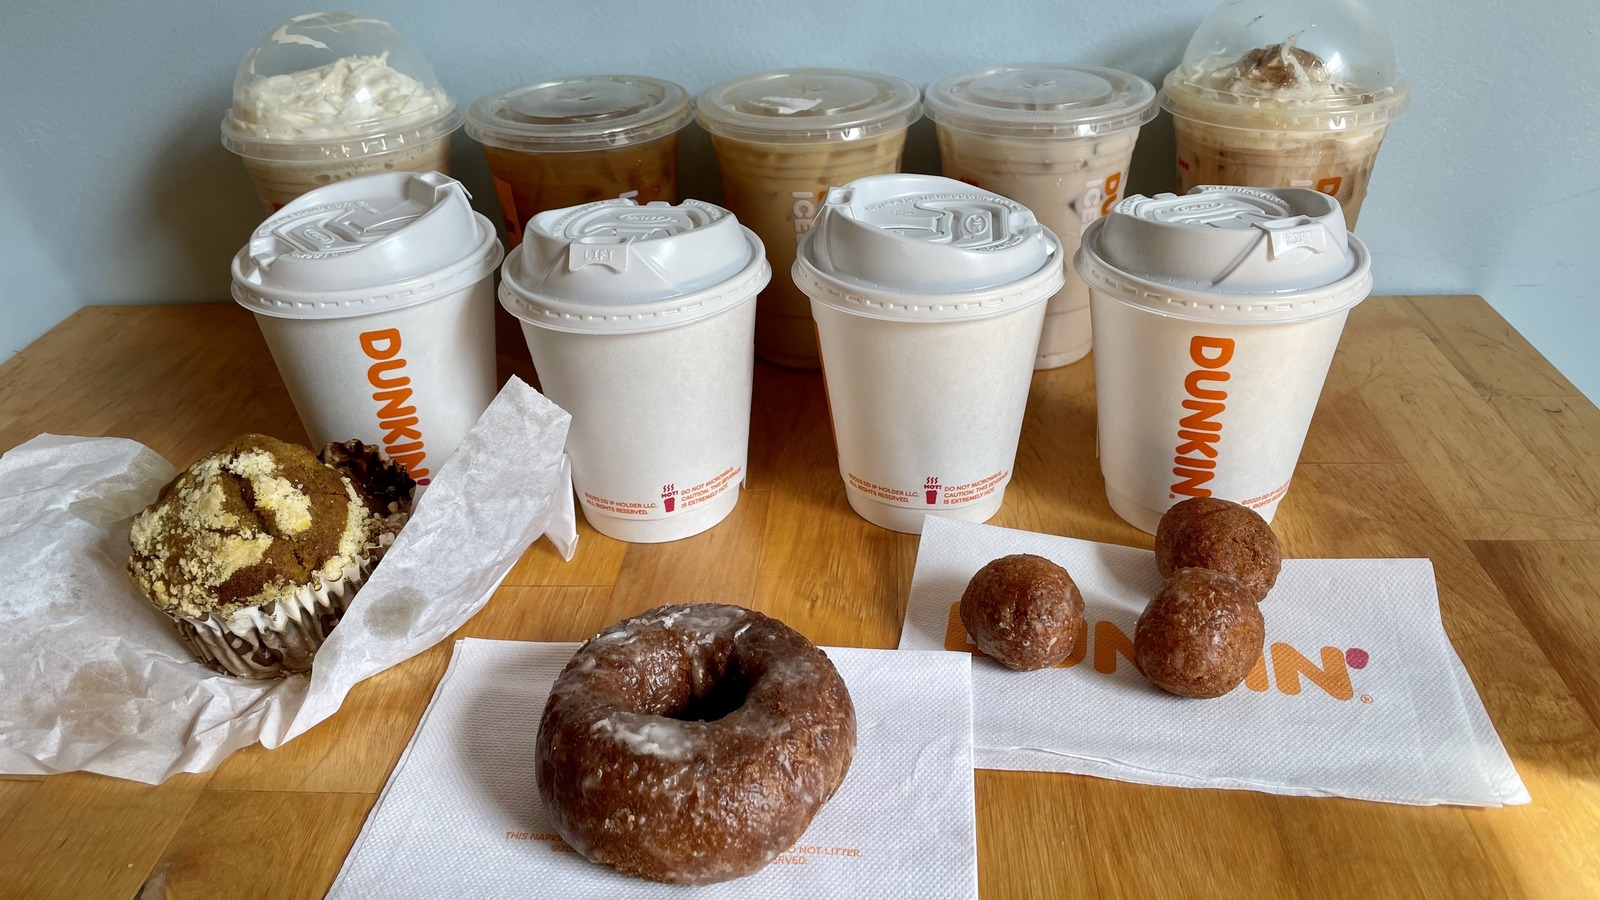 We Tried Dunkin' Donuts' Entire Fall Menu So You Don't Have To